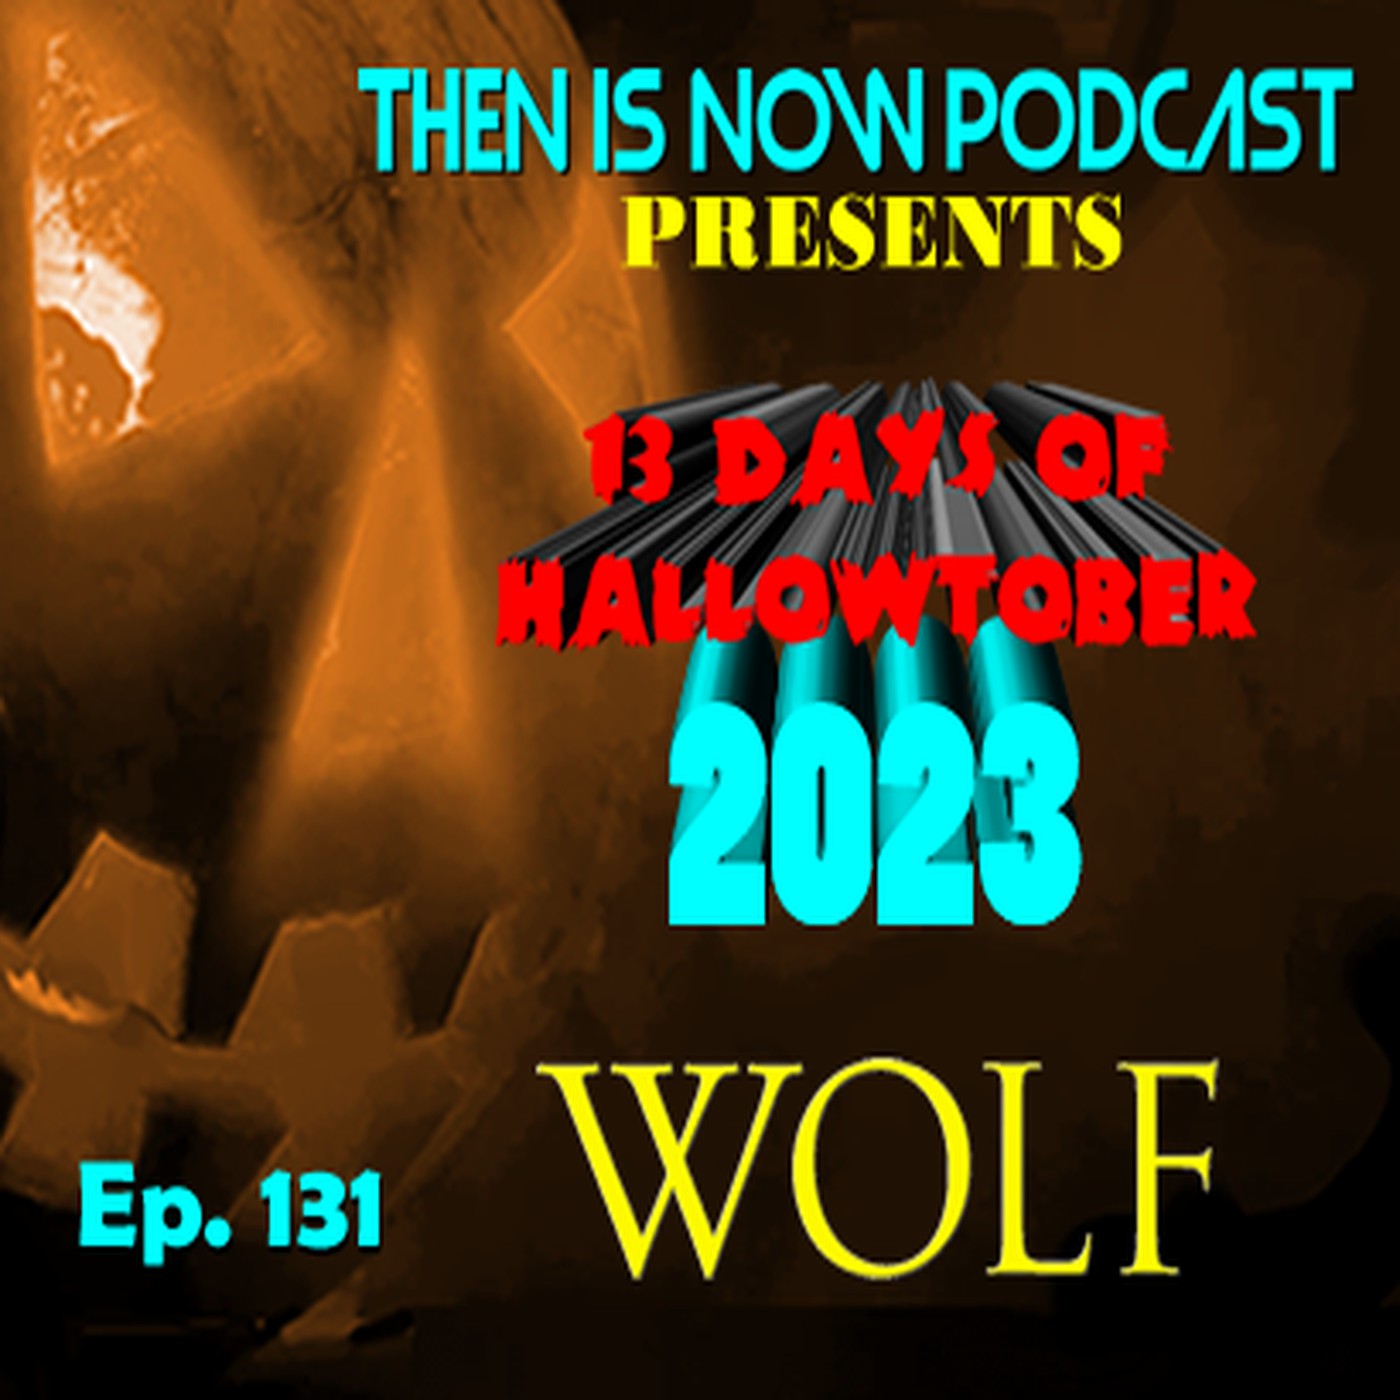 Then Is Now Ep. 131 - 13 Days of Hallowtober - Wolf (1994)